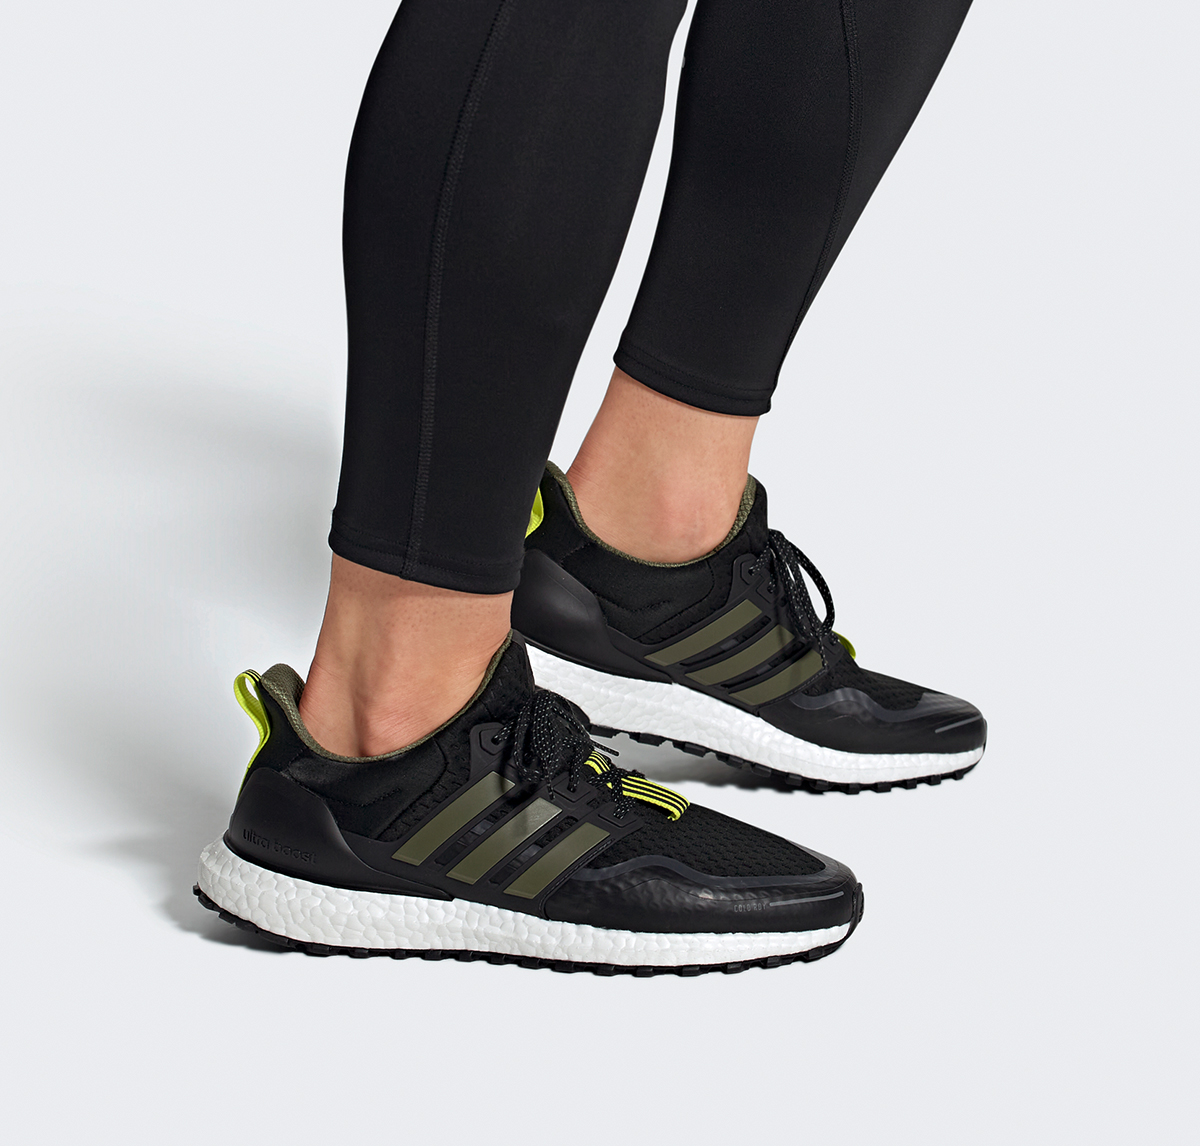 adidas Ultraboost Cold Ready DNA - Primeblue - Black Olive onfeet